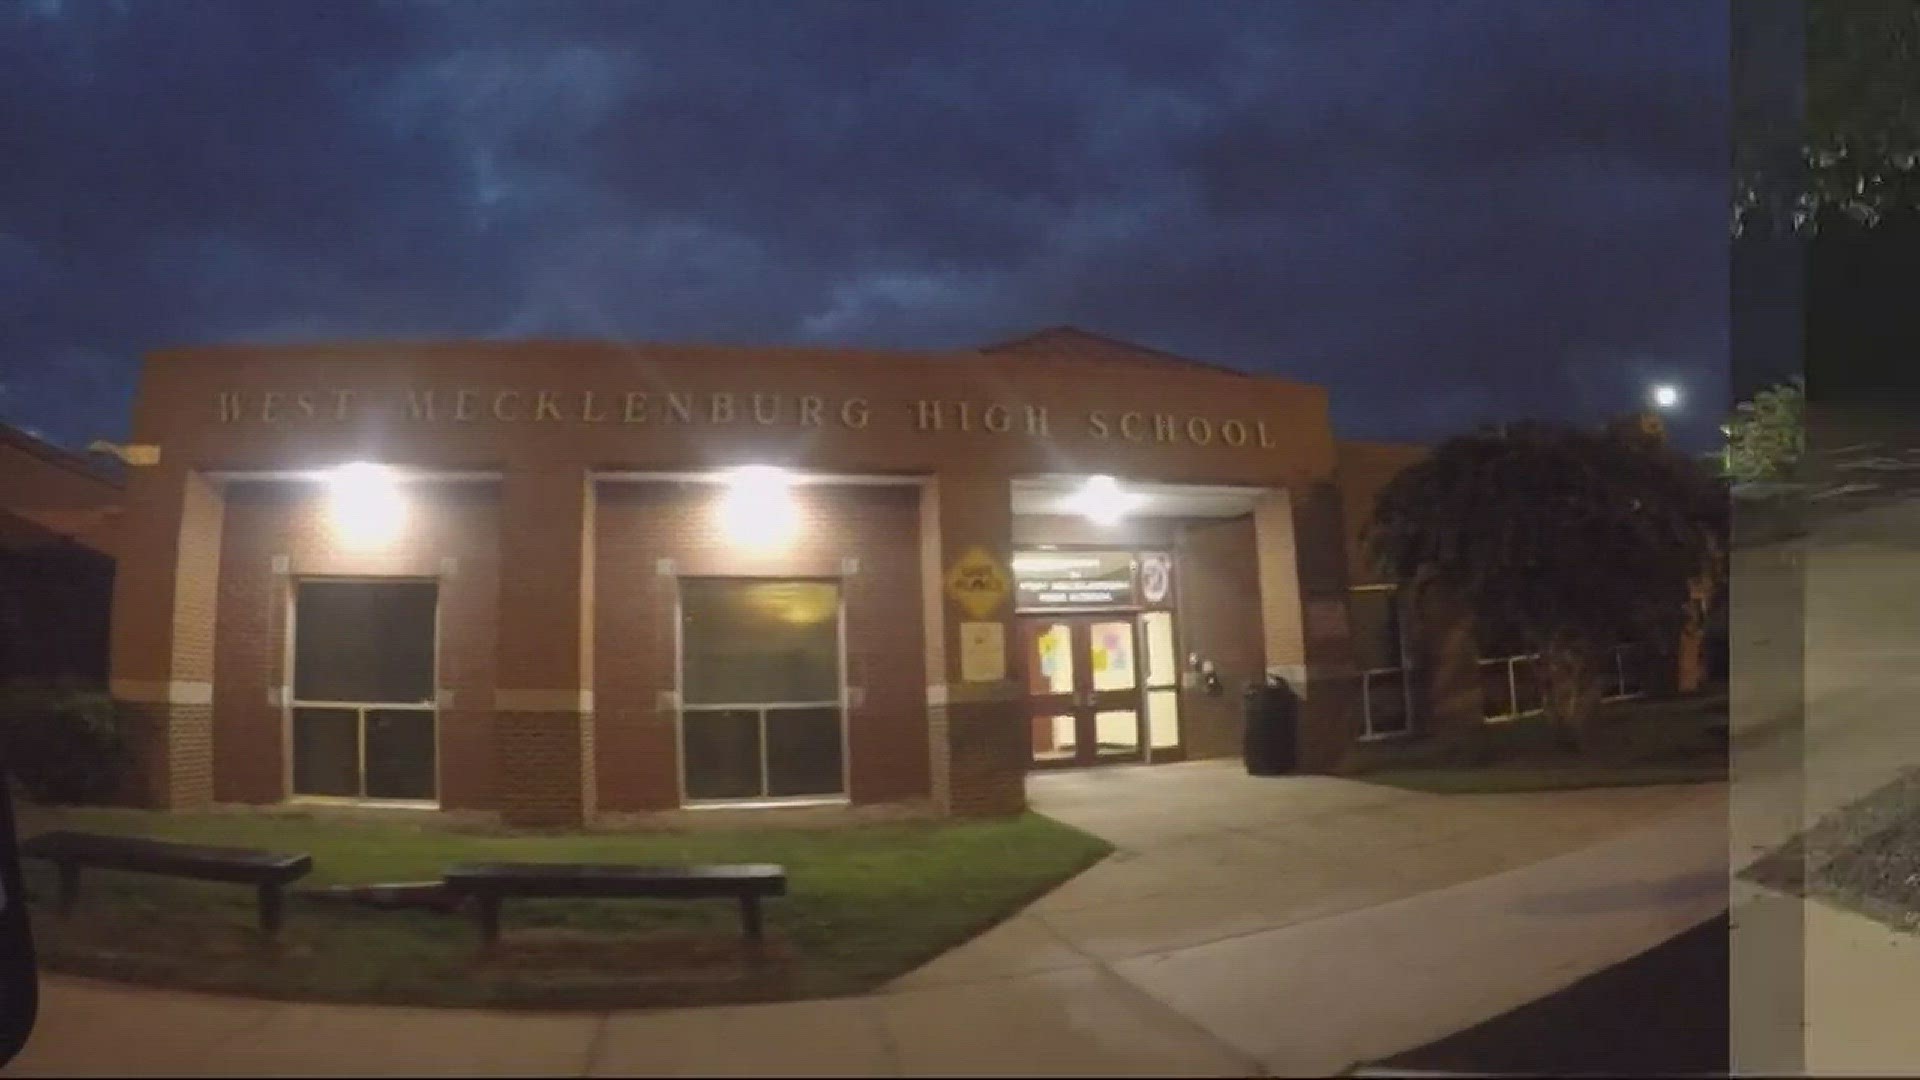 A shocking health inspection revealed disturbing details found at a local high school.